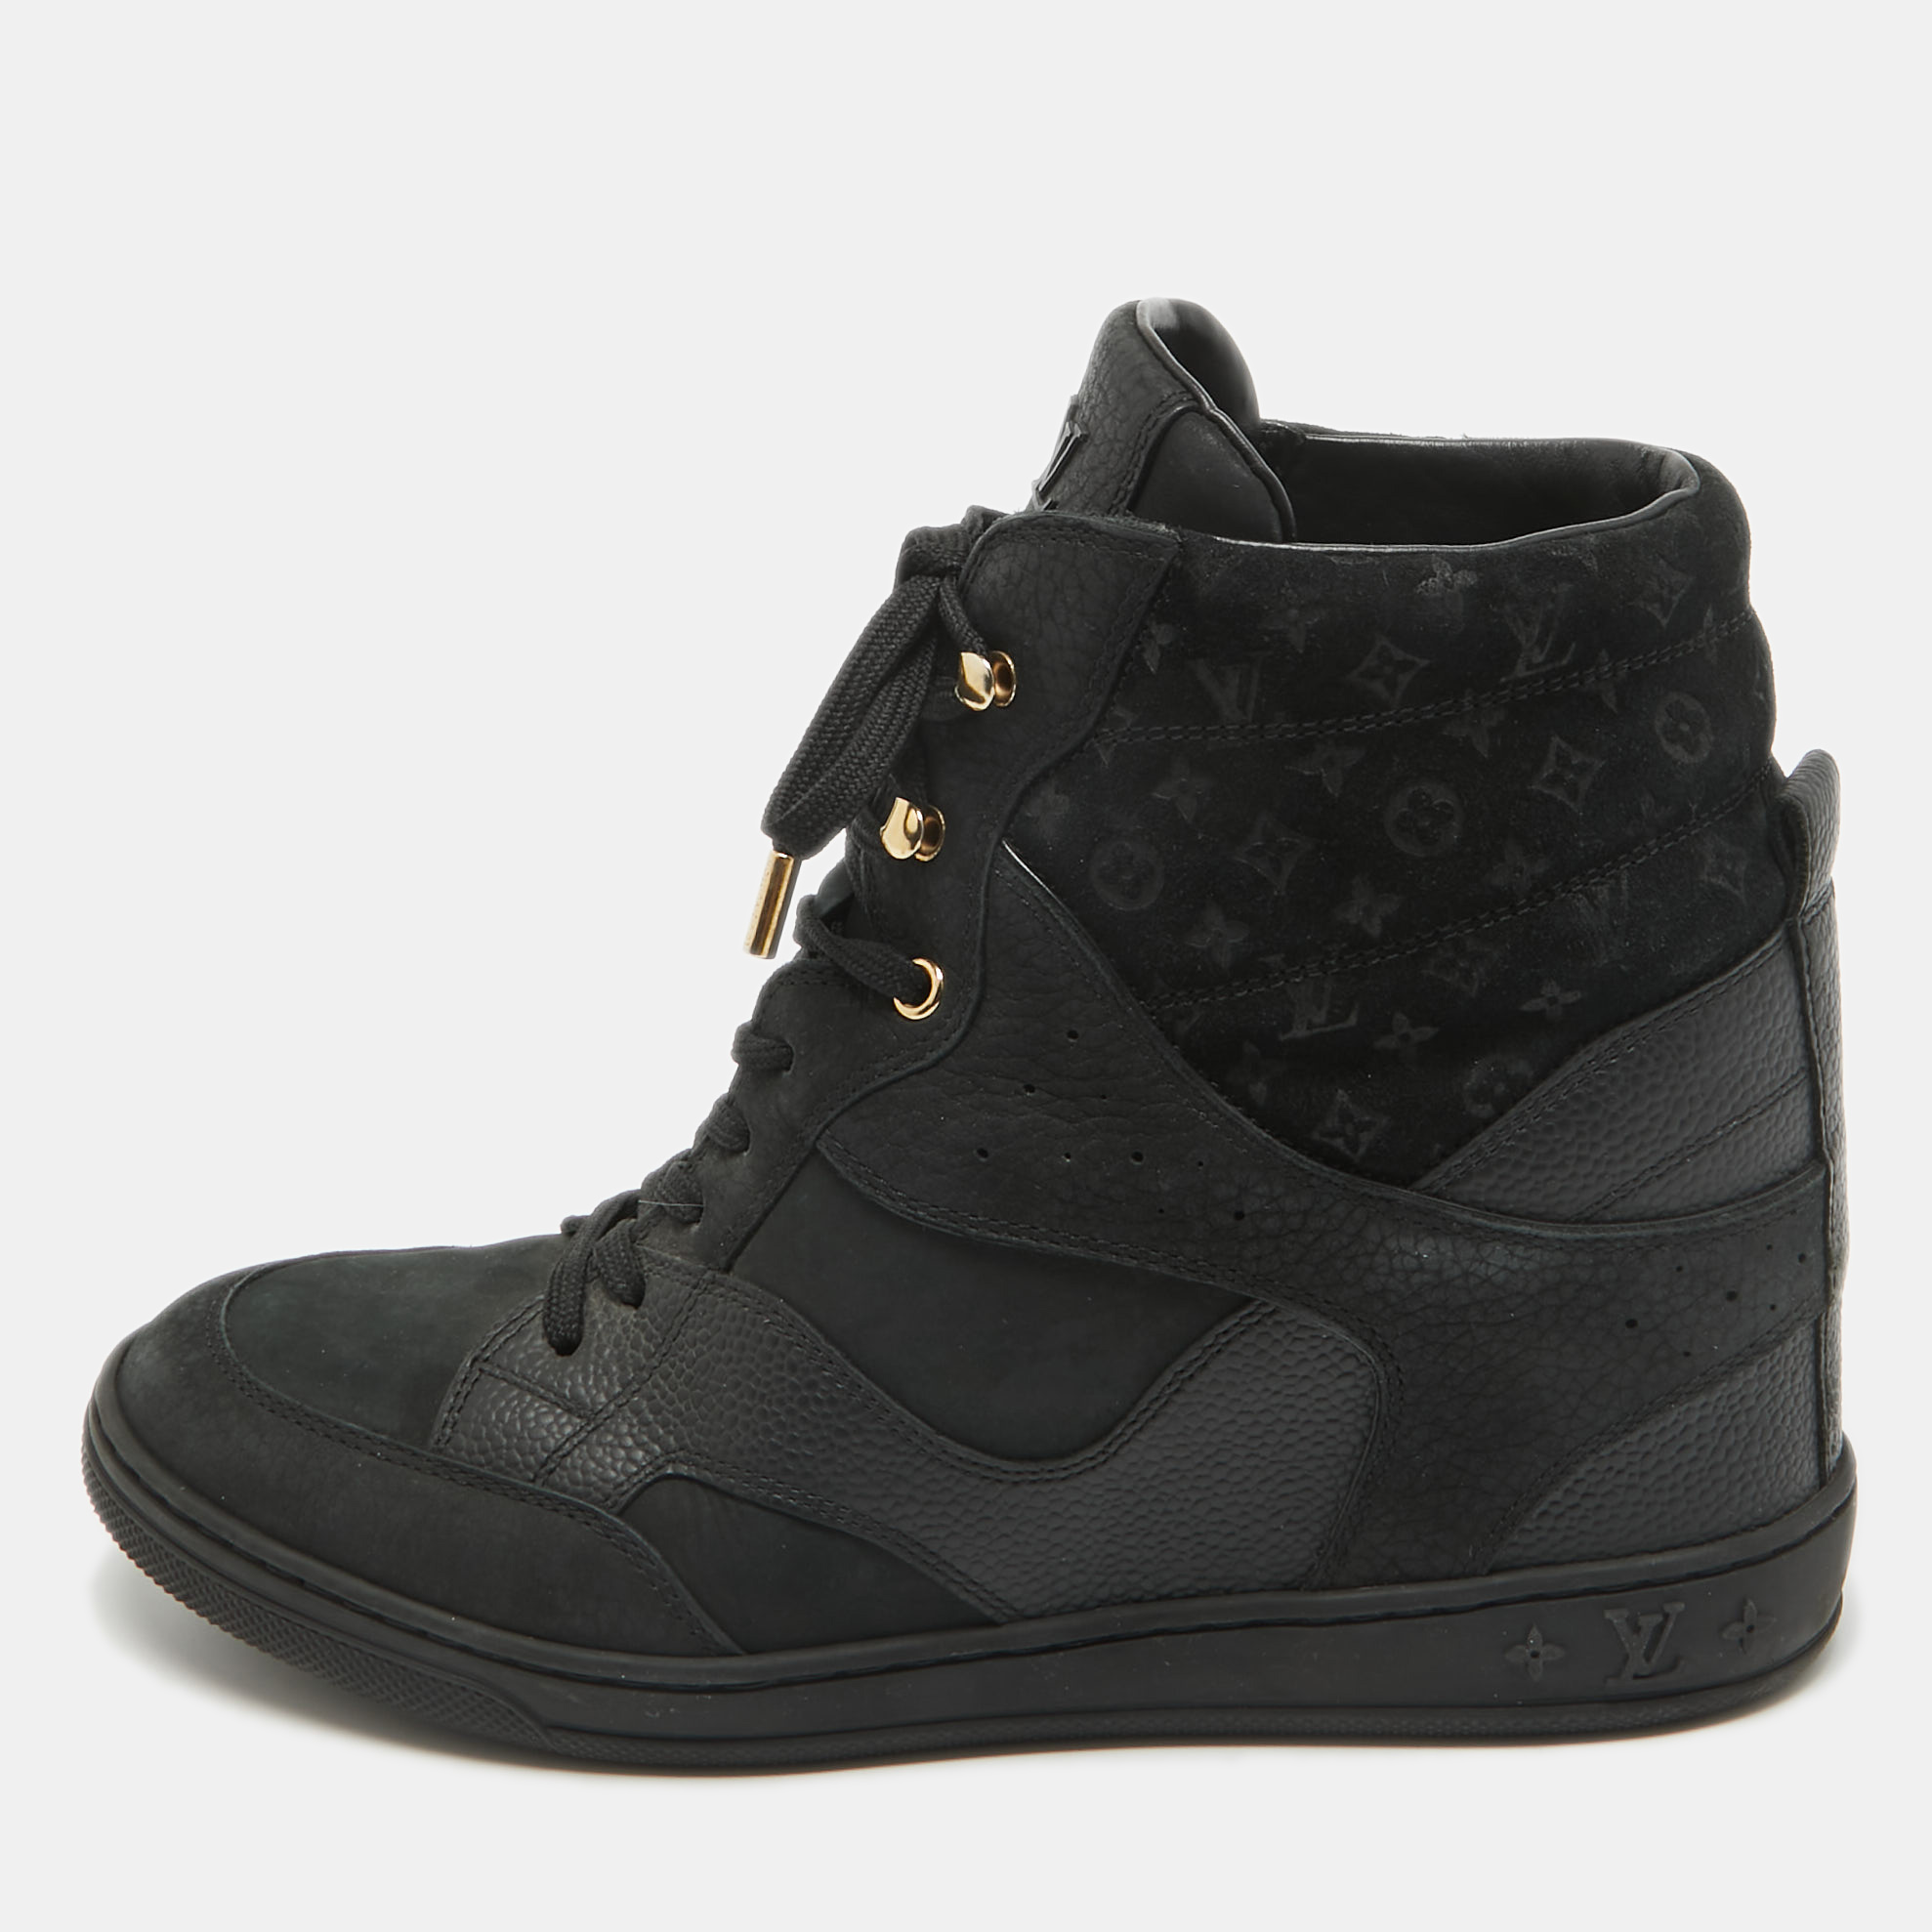 Louis vuitton black nubuck leather and monogram suede millenium wedge high top sneakers size 40